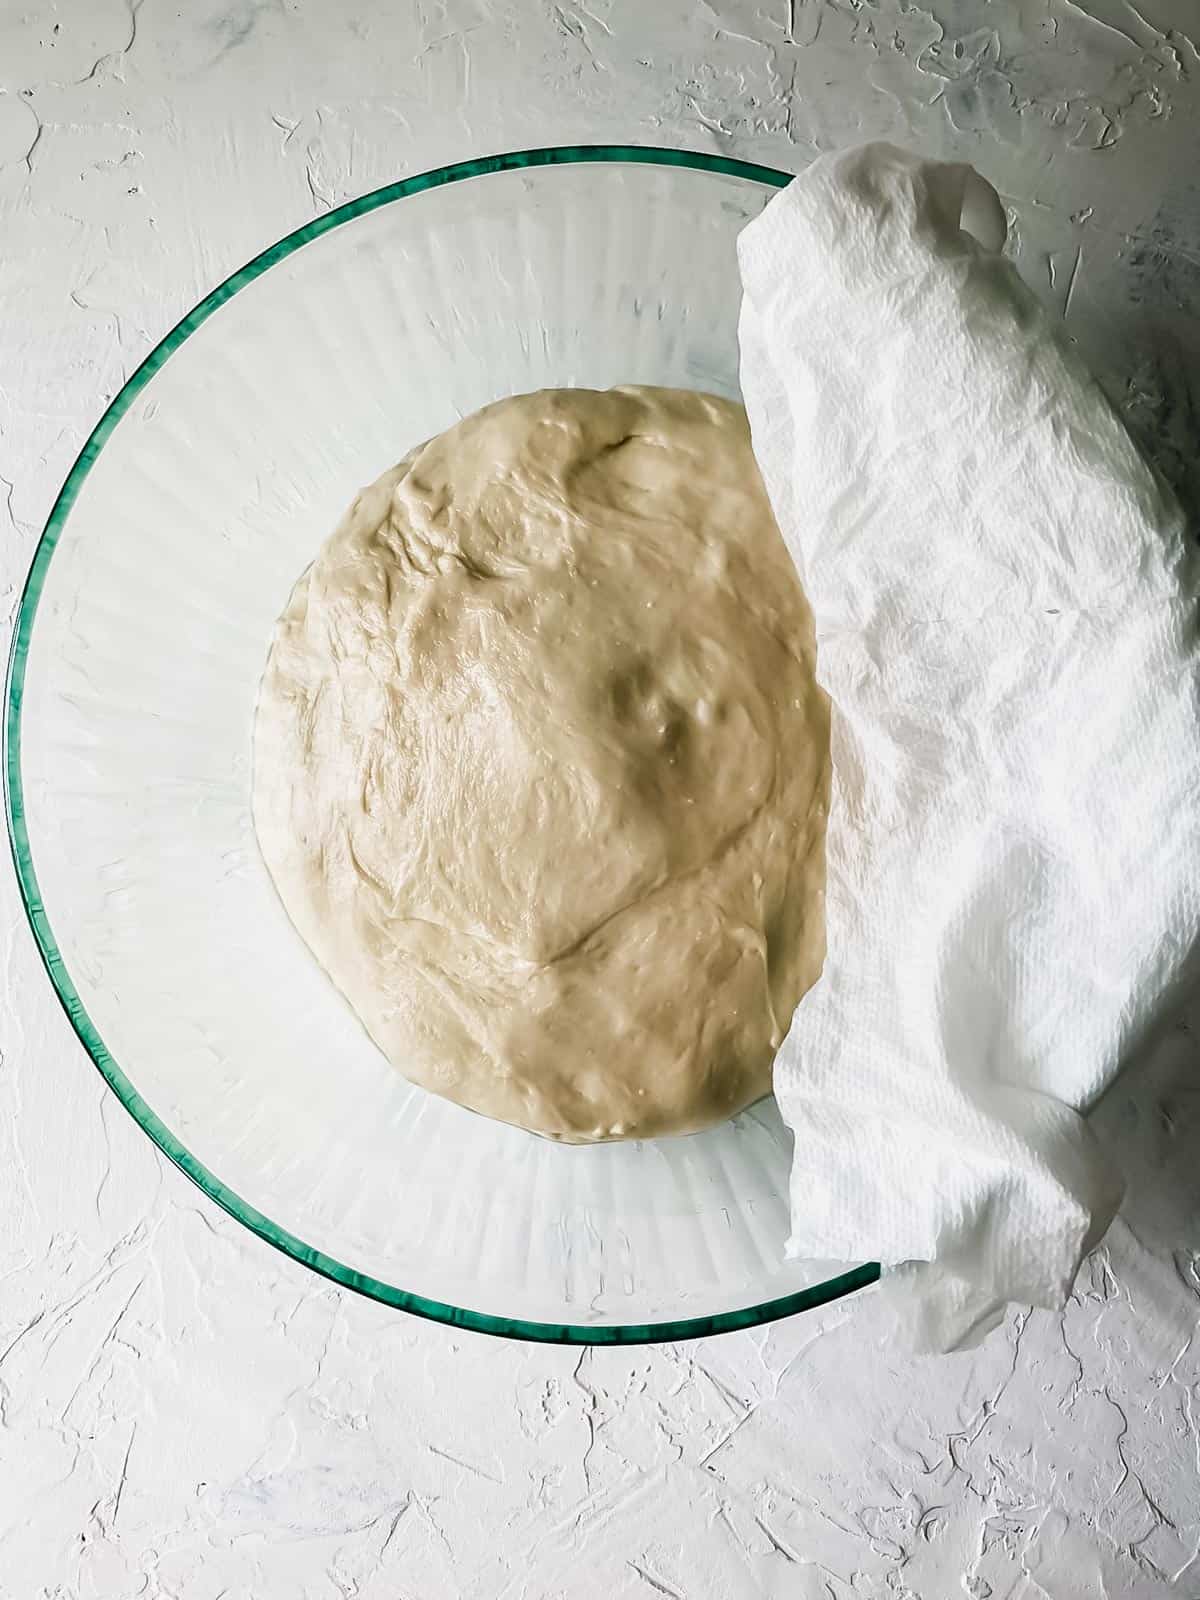 pizza dough in a glass bowl with a damp paper towel on the side